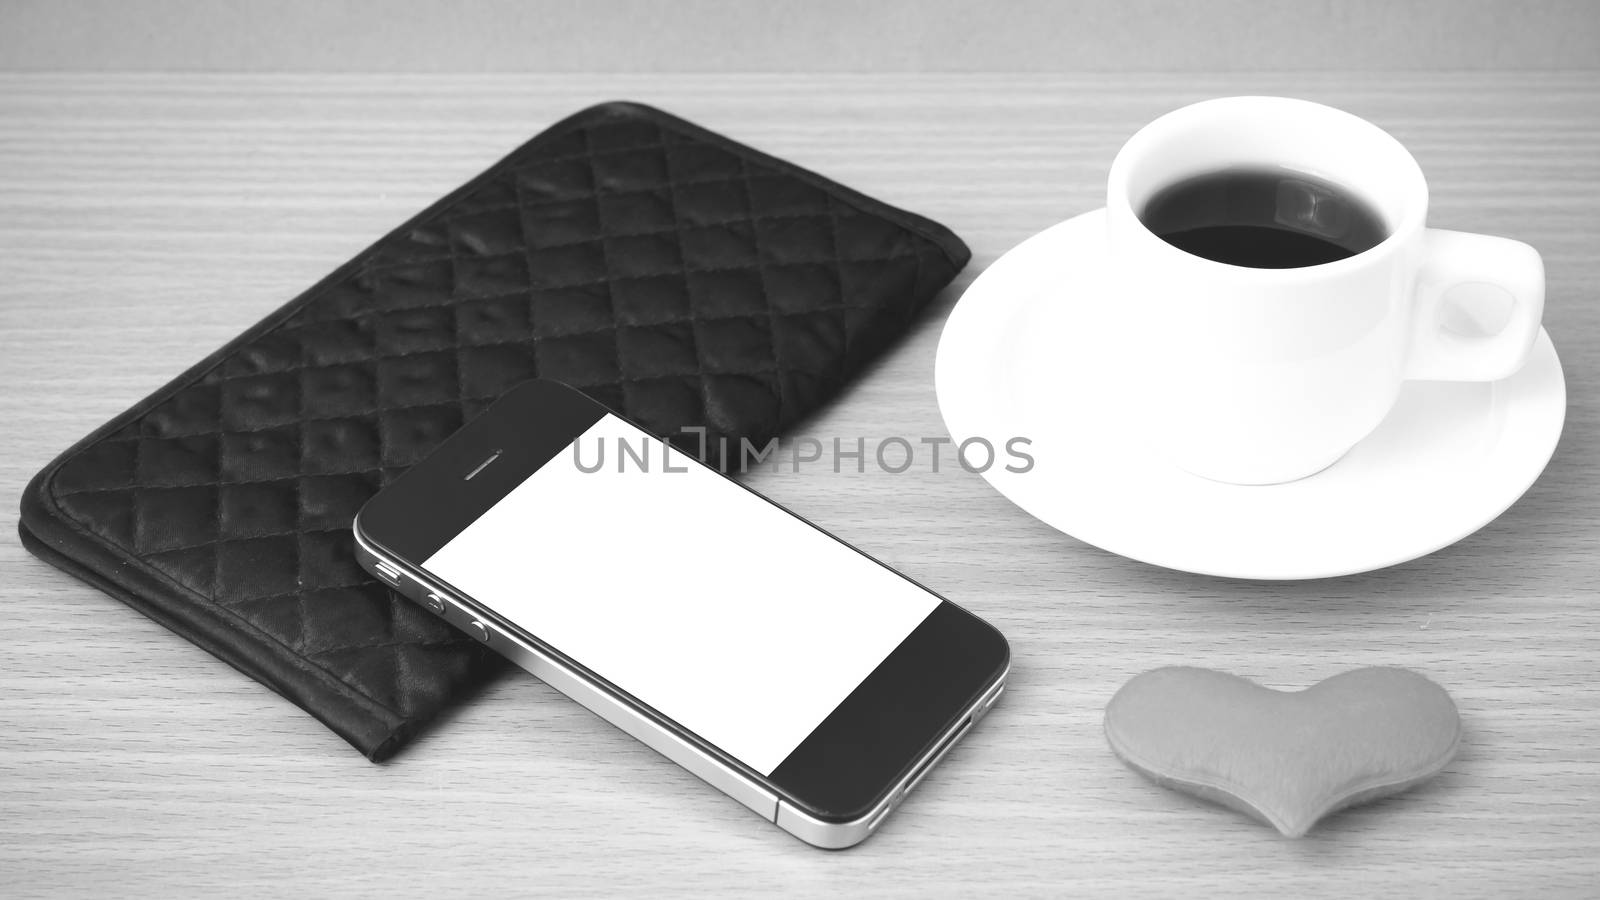 coffee,phone,wallet and heart on wood table background black and white color